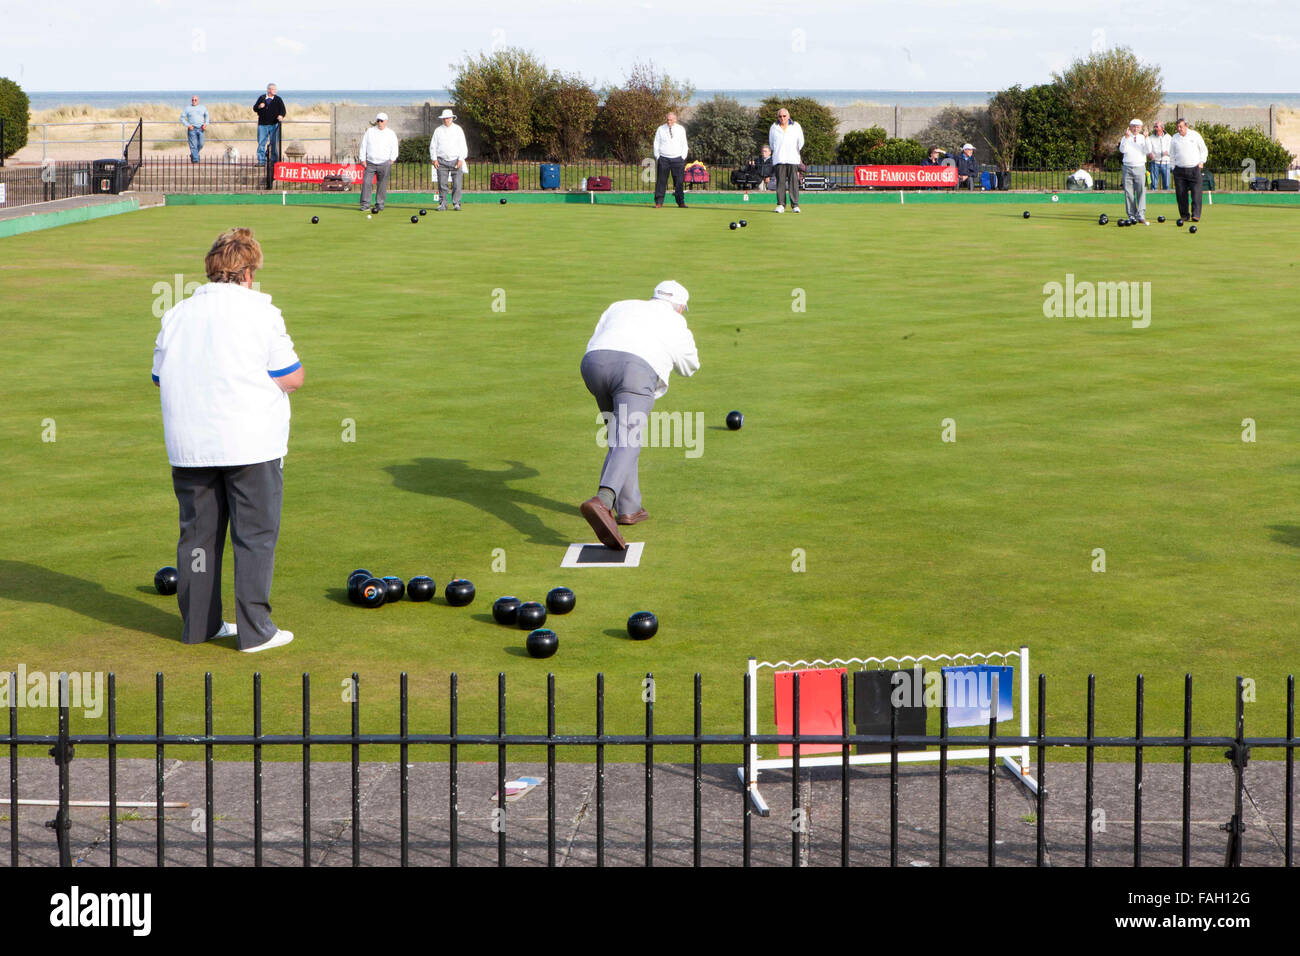 Couronne green bowling de Great Yarmouth, Norfolk, Angleterre Banque D'Images